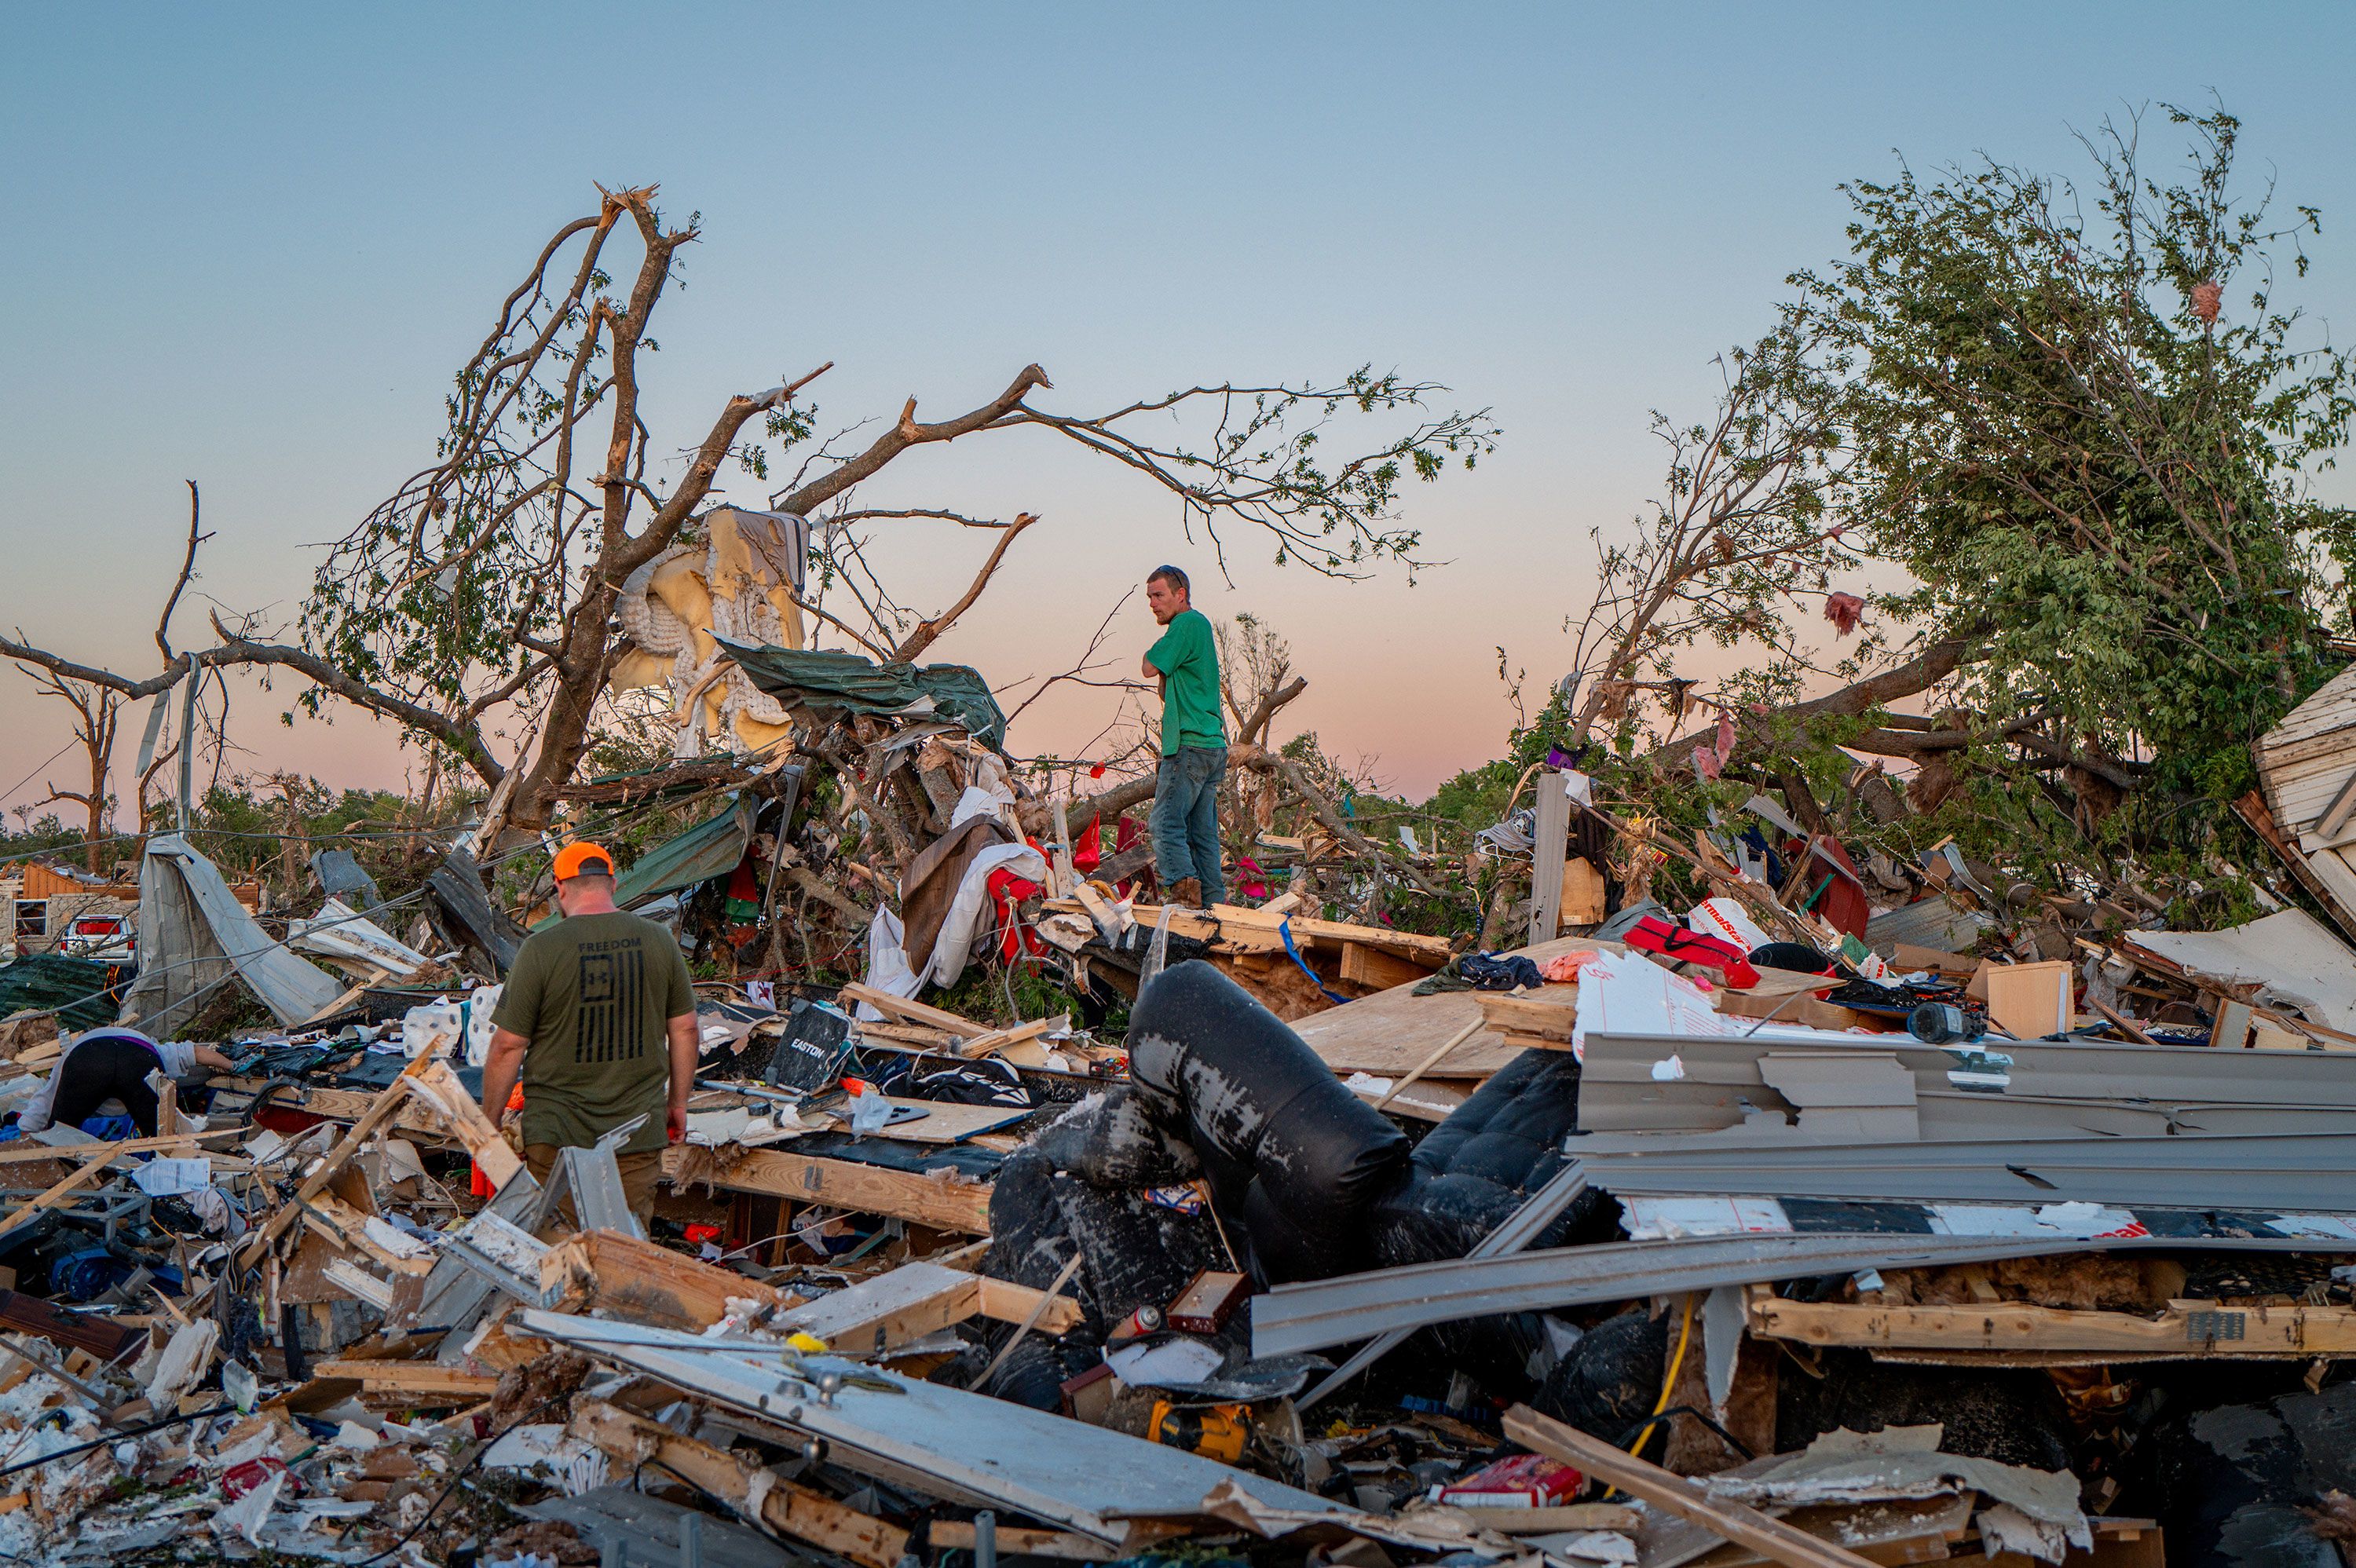 The Crowder family surveys what's left of their home Tuesday, May 7, after a tornado in Barnsdall, Oklahoma.